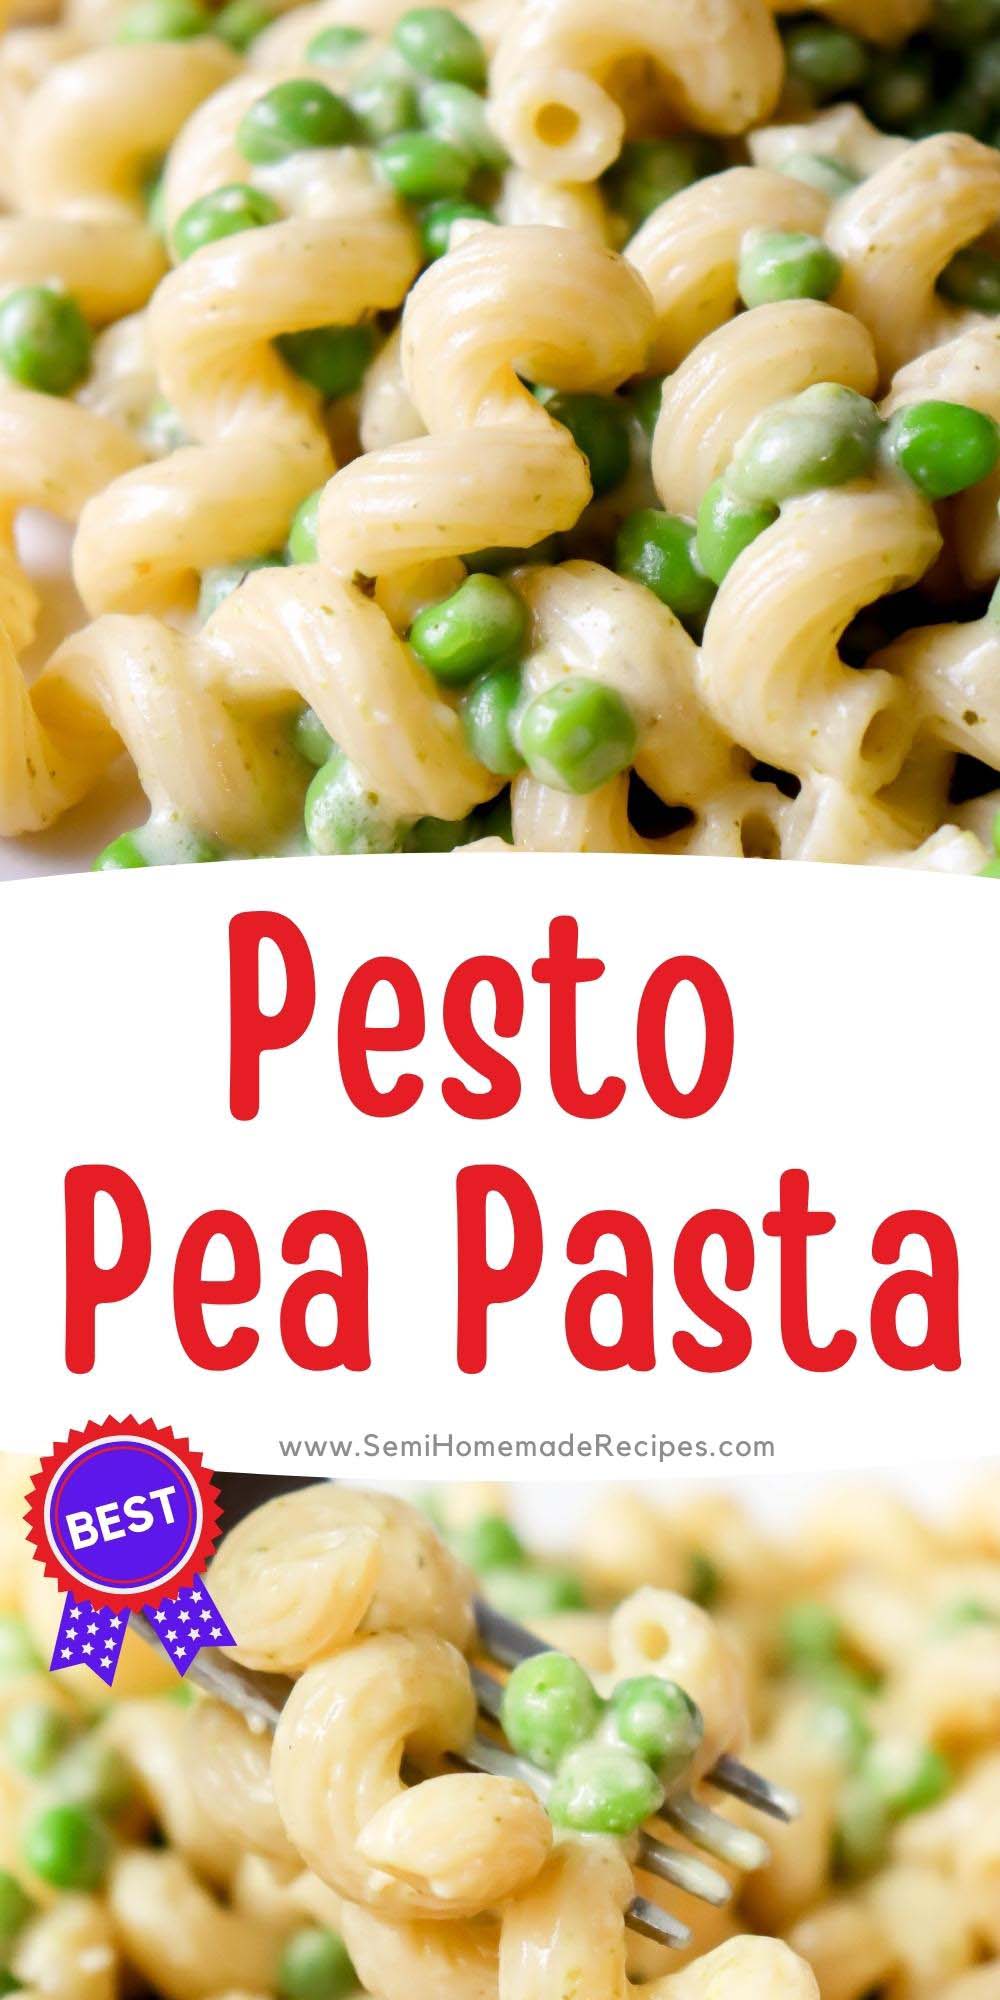 This Pesto Pea Pasta is ready in until 30 minutes and it's a super wonderful and flavorful meal! This 5 ingredients recipe is semi homemade too, so there is not a lot of work to make this meal come to life! 